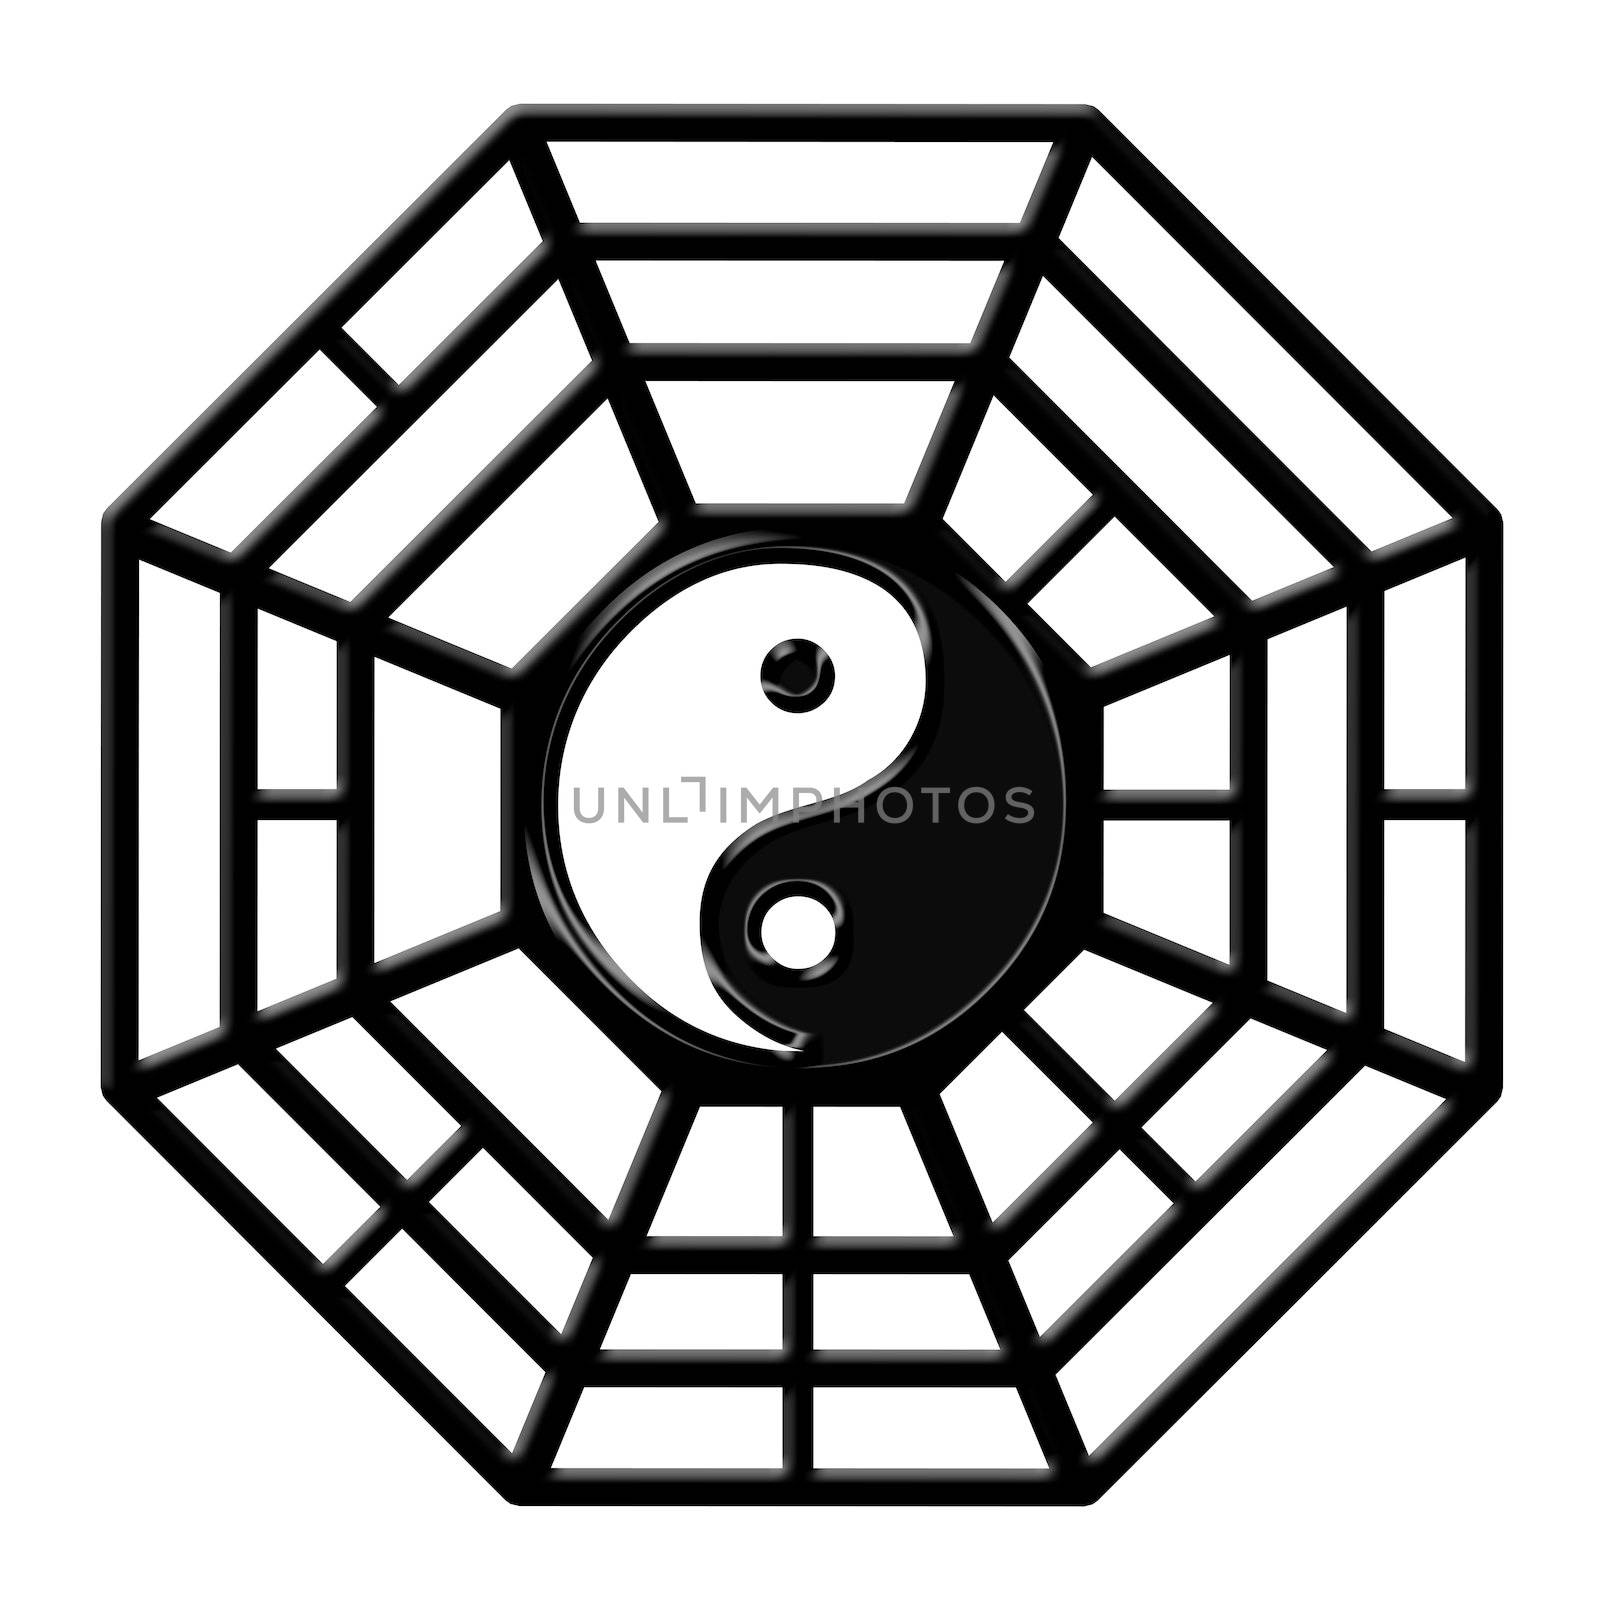 Chinese Ba Gua Eight Sided Trigrams OCtagon Yin Yang Symbol Isolated on White Background